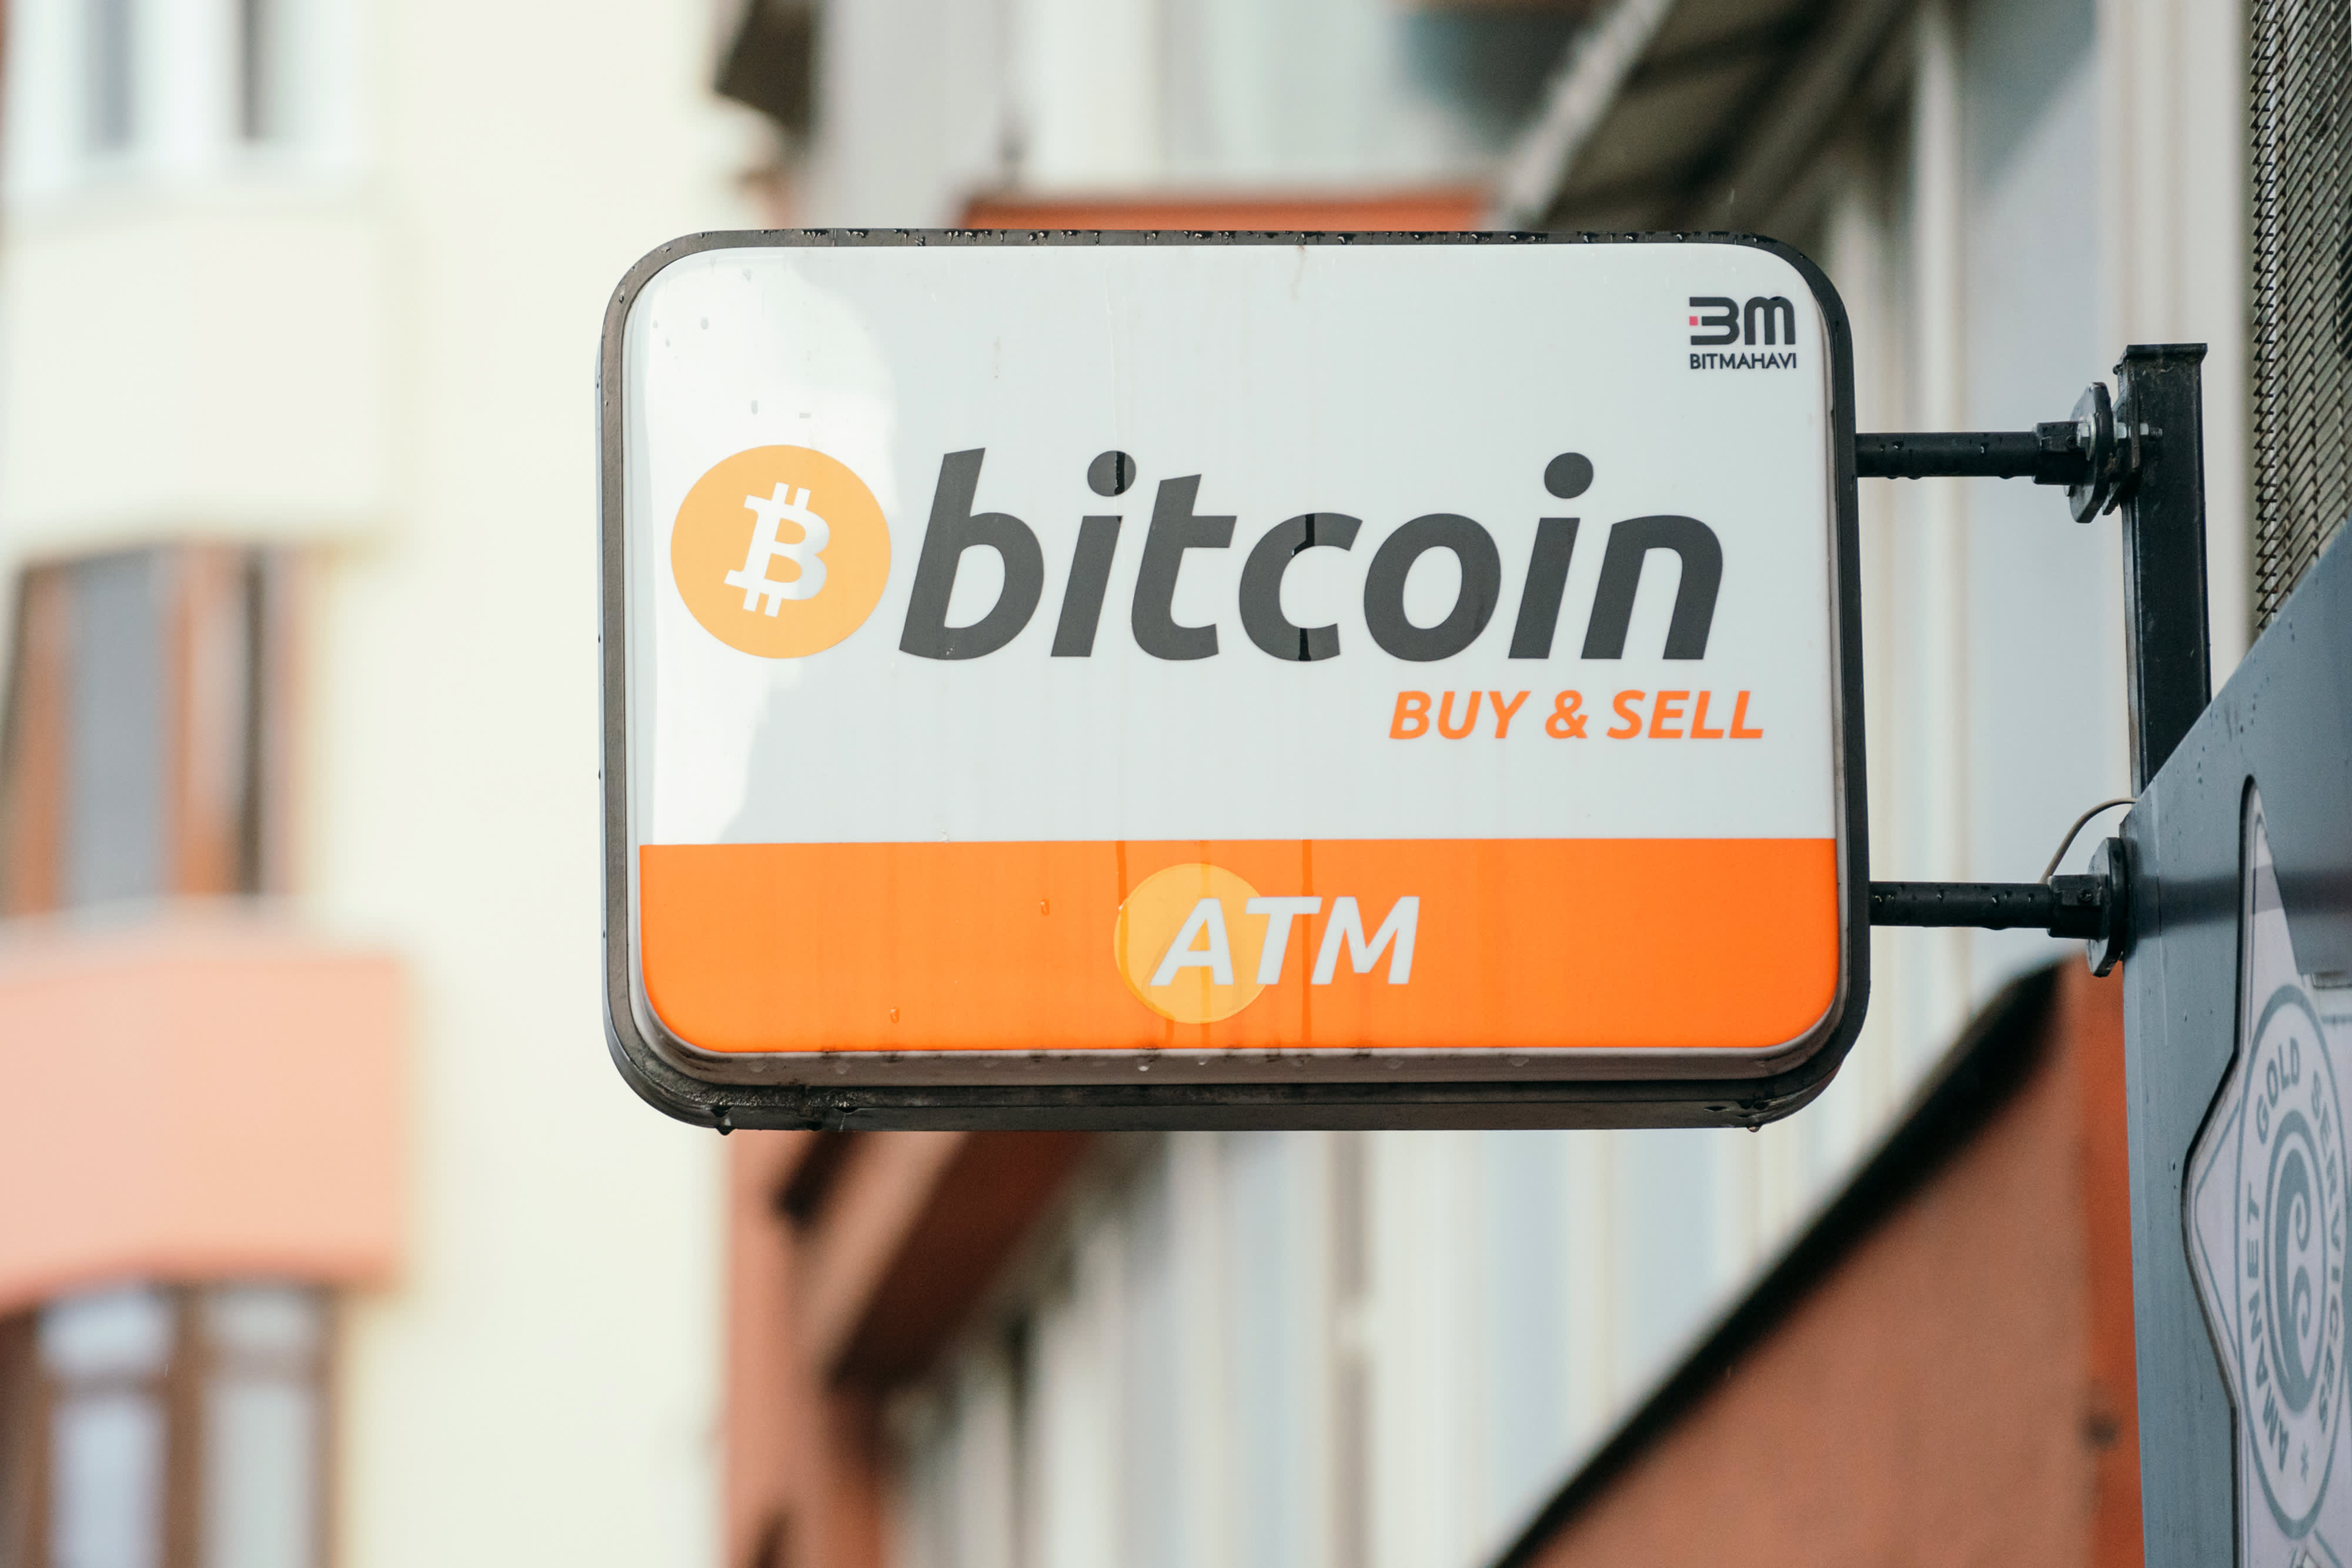 Despite a 60% drop this year and choppy waters, Bitcoin still has a big opportunity in payments